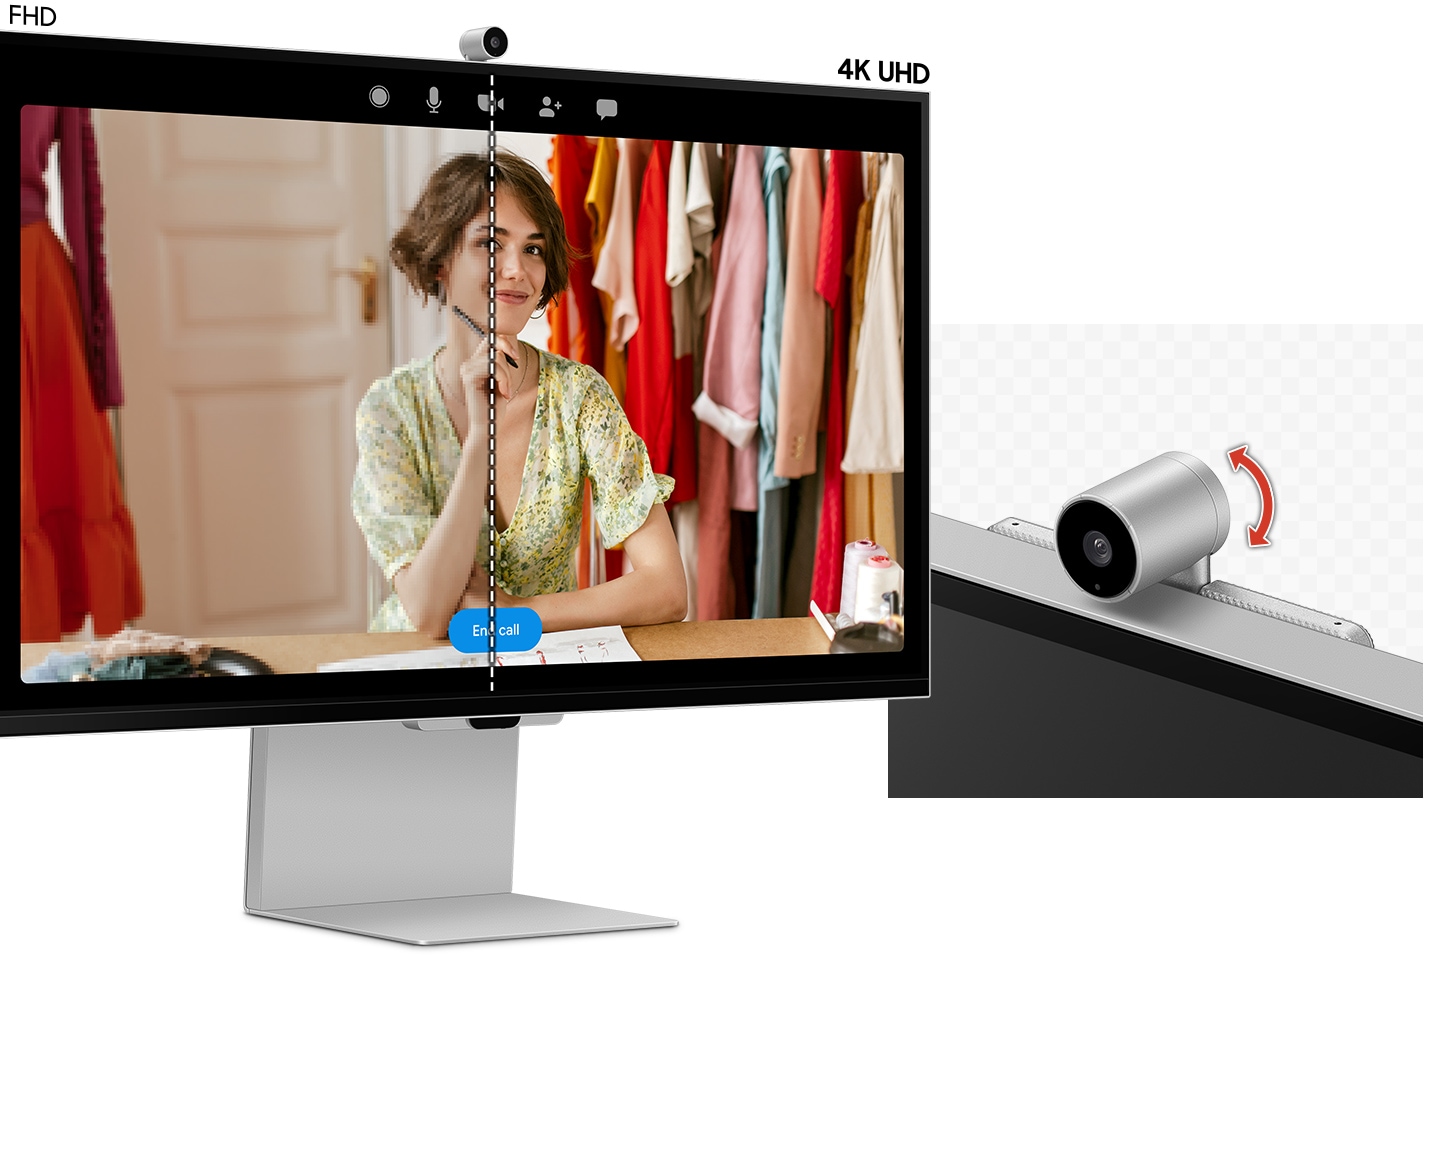 There is a monitor on the left, and the screen is divided into half. On the left side, it says FHD, and on the right side, it says 4K UHD with clearer onscreen. And there's also a close-up cut of the SlimFit camera on the monitor, and it moves up and down showing that the angle is adjustable.